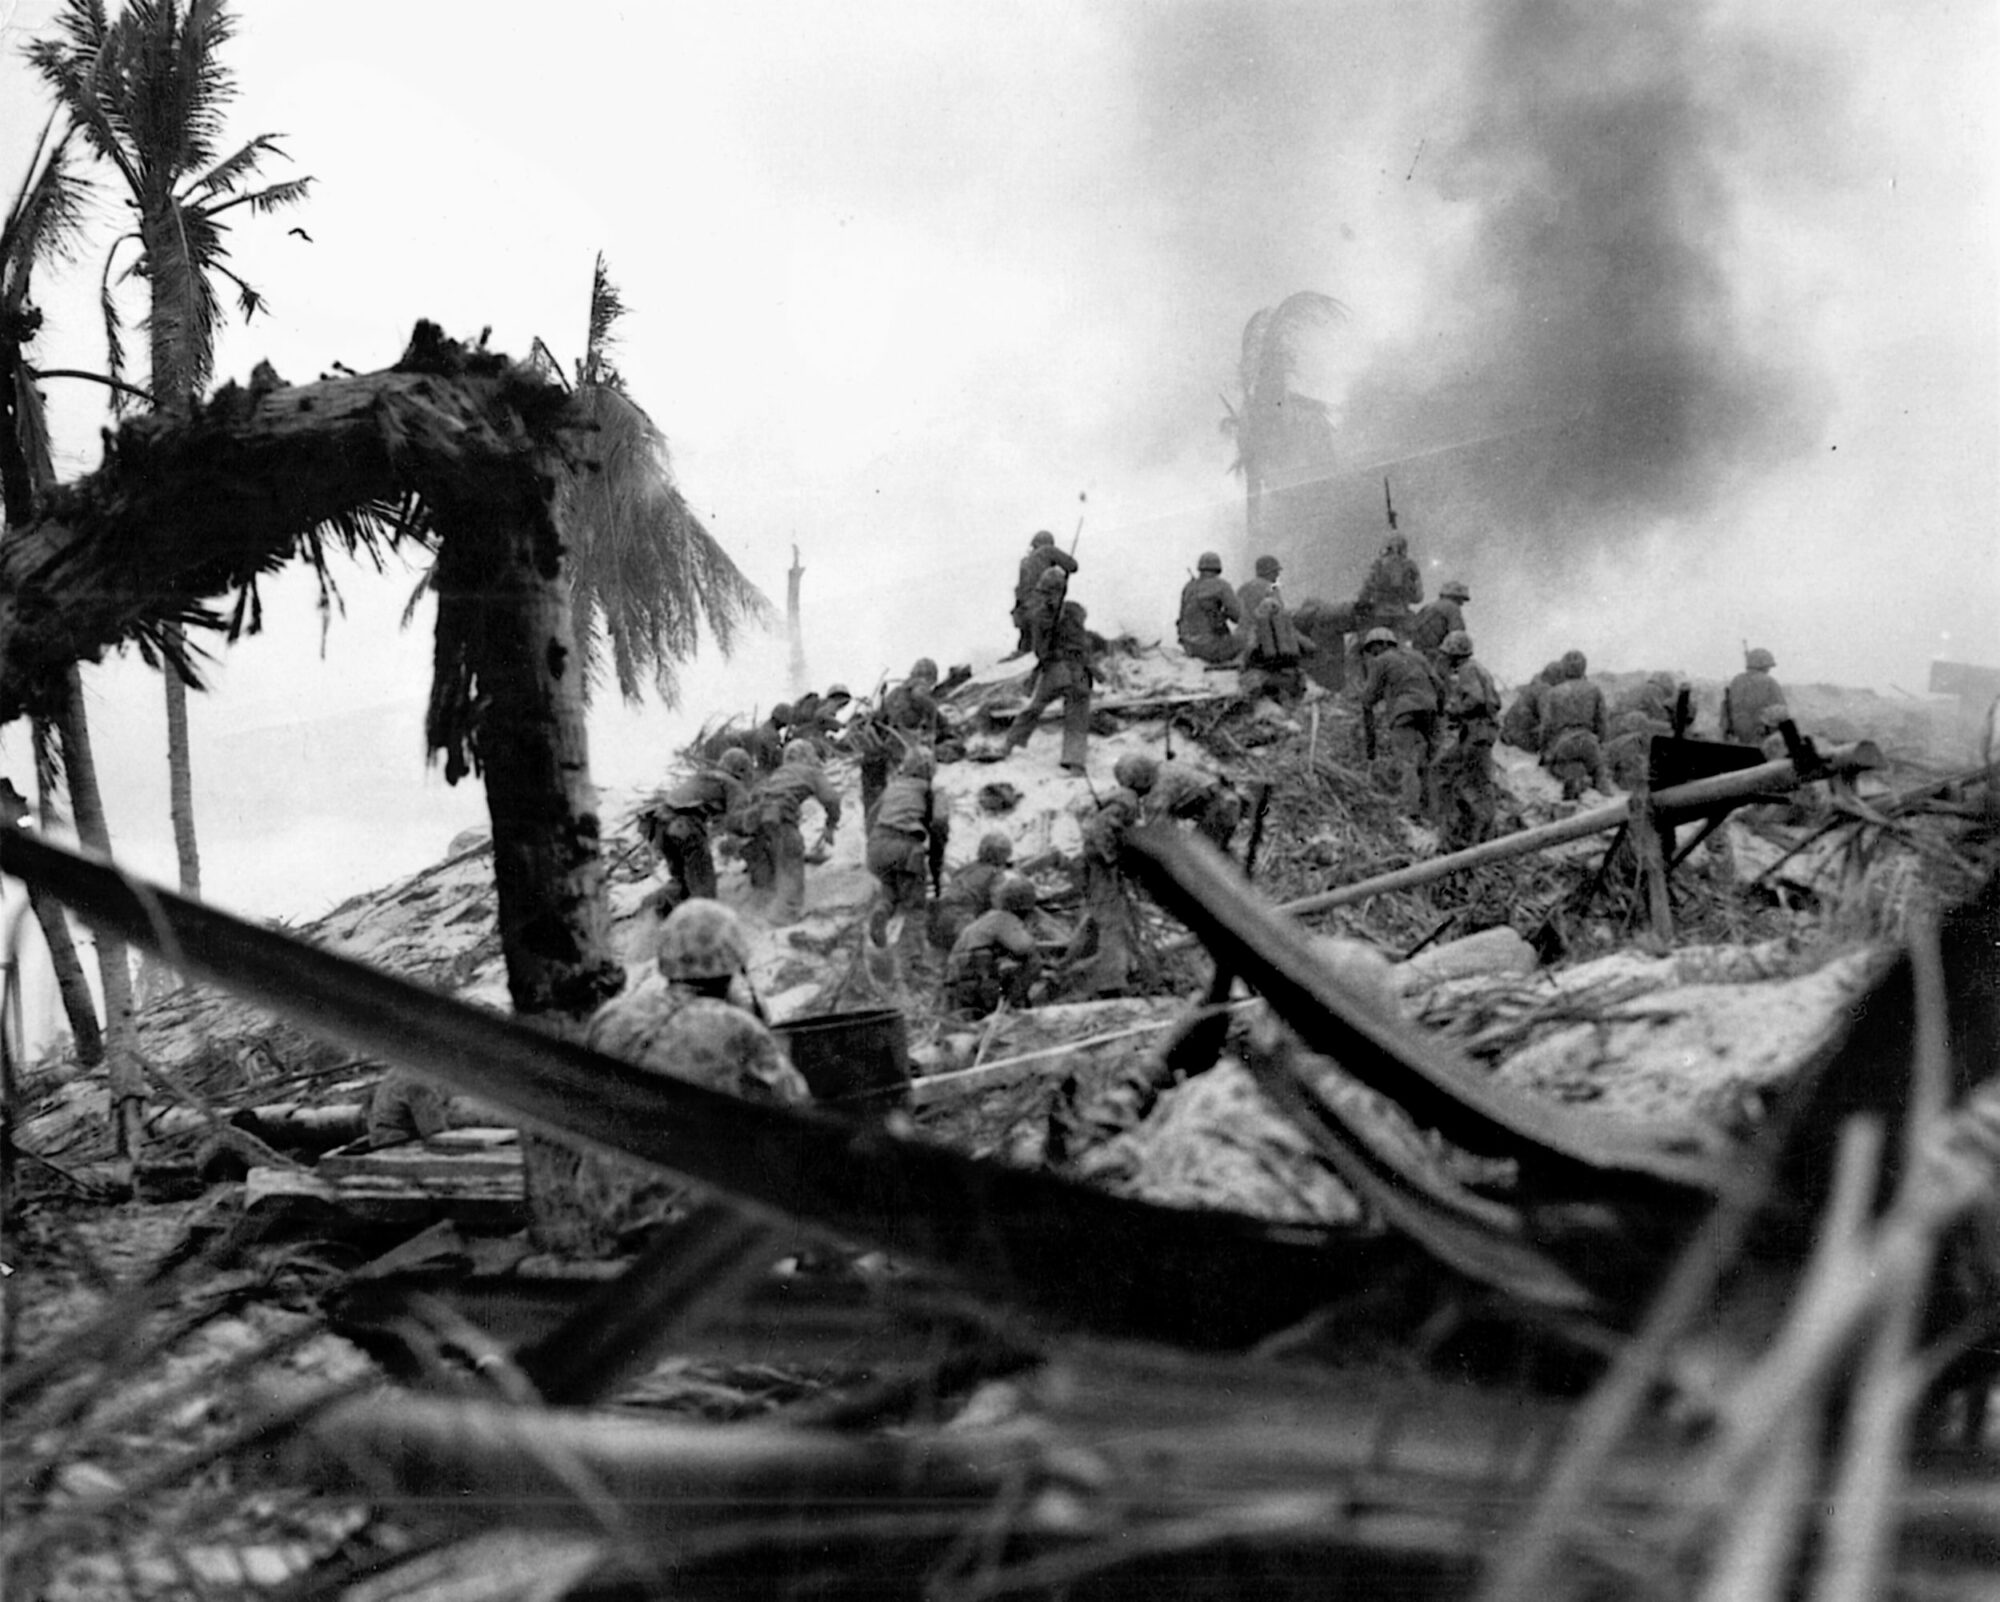 1st Lt. Alexander Bonnyman, Jr., identified by a faint arrow drawn on this image by combat photographer Obie Newcomb, leads a contingent of Marines in an attack on the two-story blockhouse believed to be the headquarters of the Japanese commander at Tarawa, Rear Admiral Keiji Shibasaki. The assault succeeded, but Bonnyman was killed in the action and received a posthumous Medal of Honor.